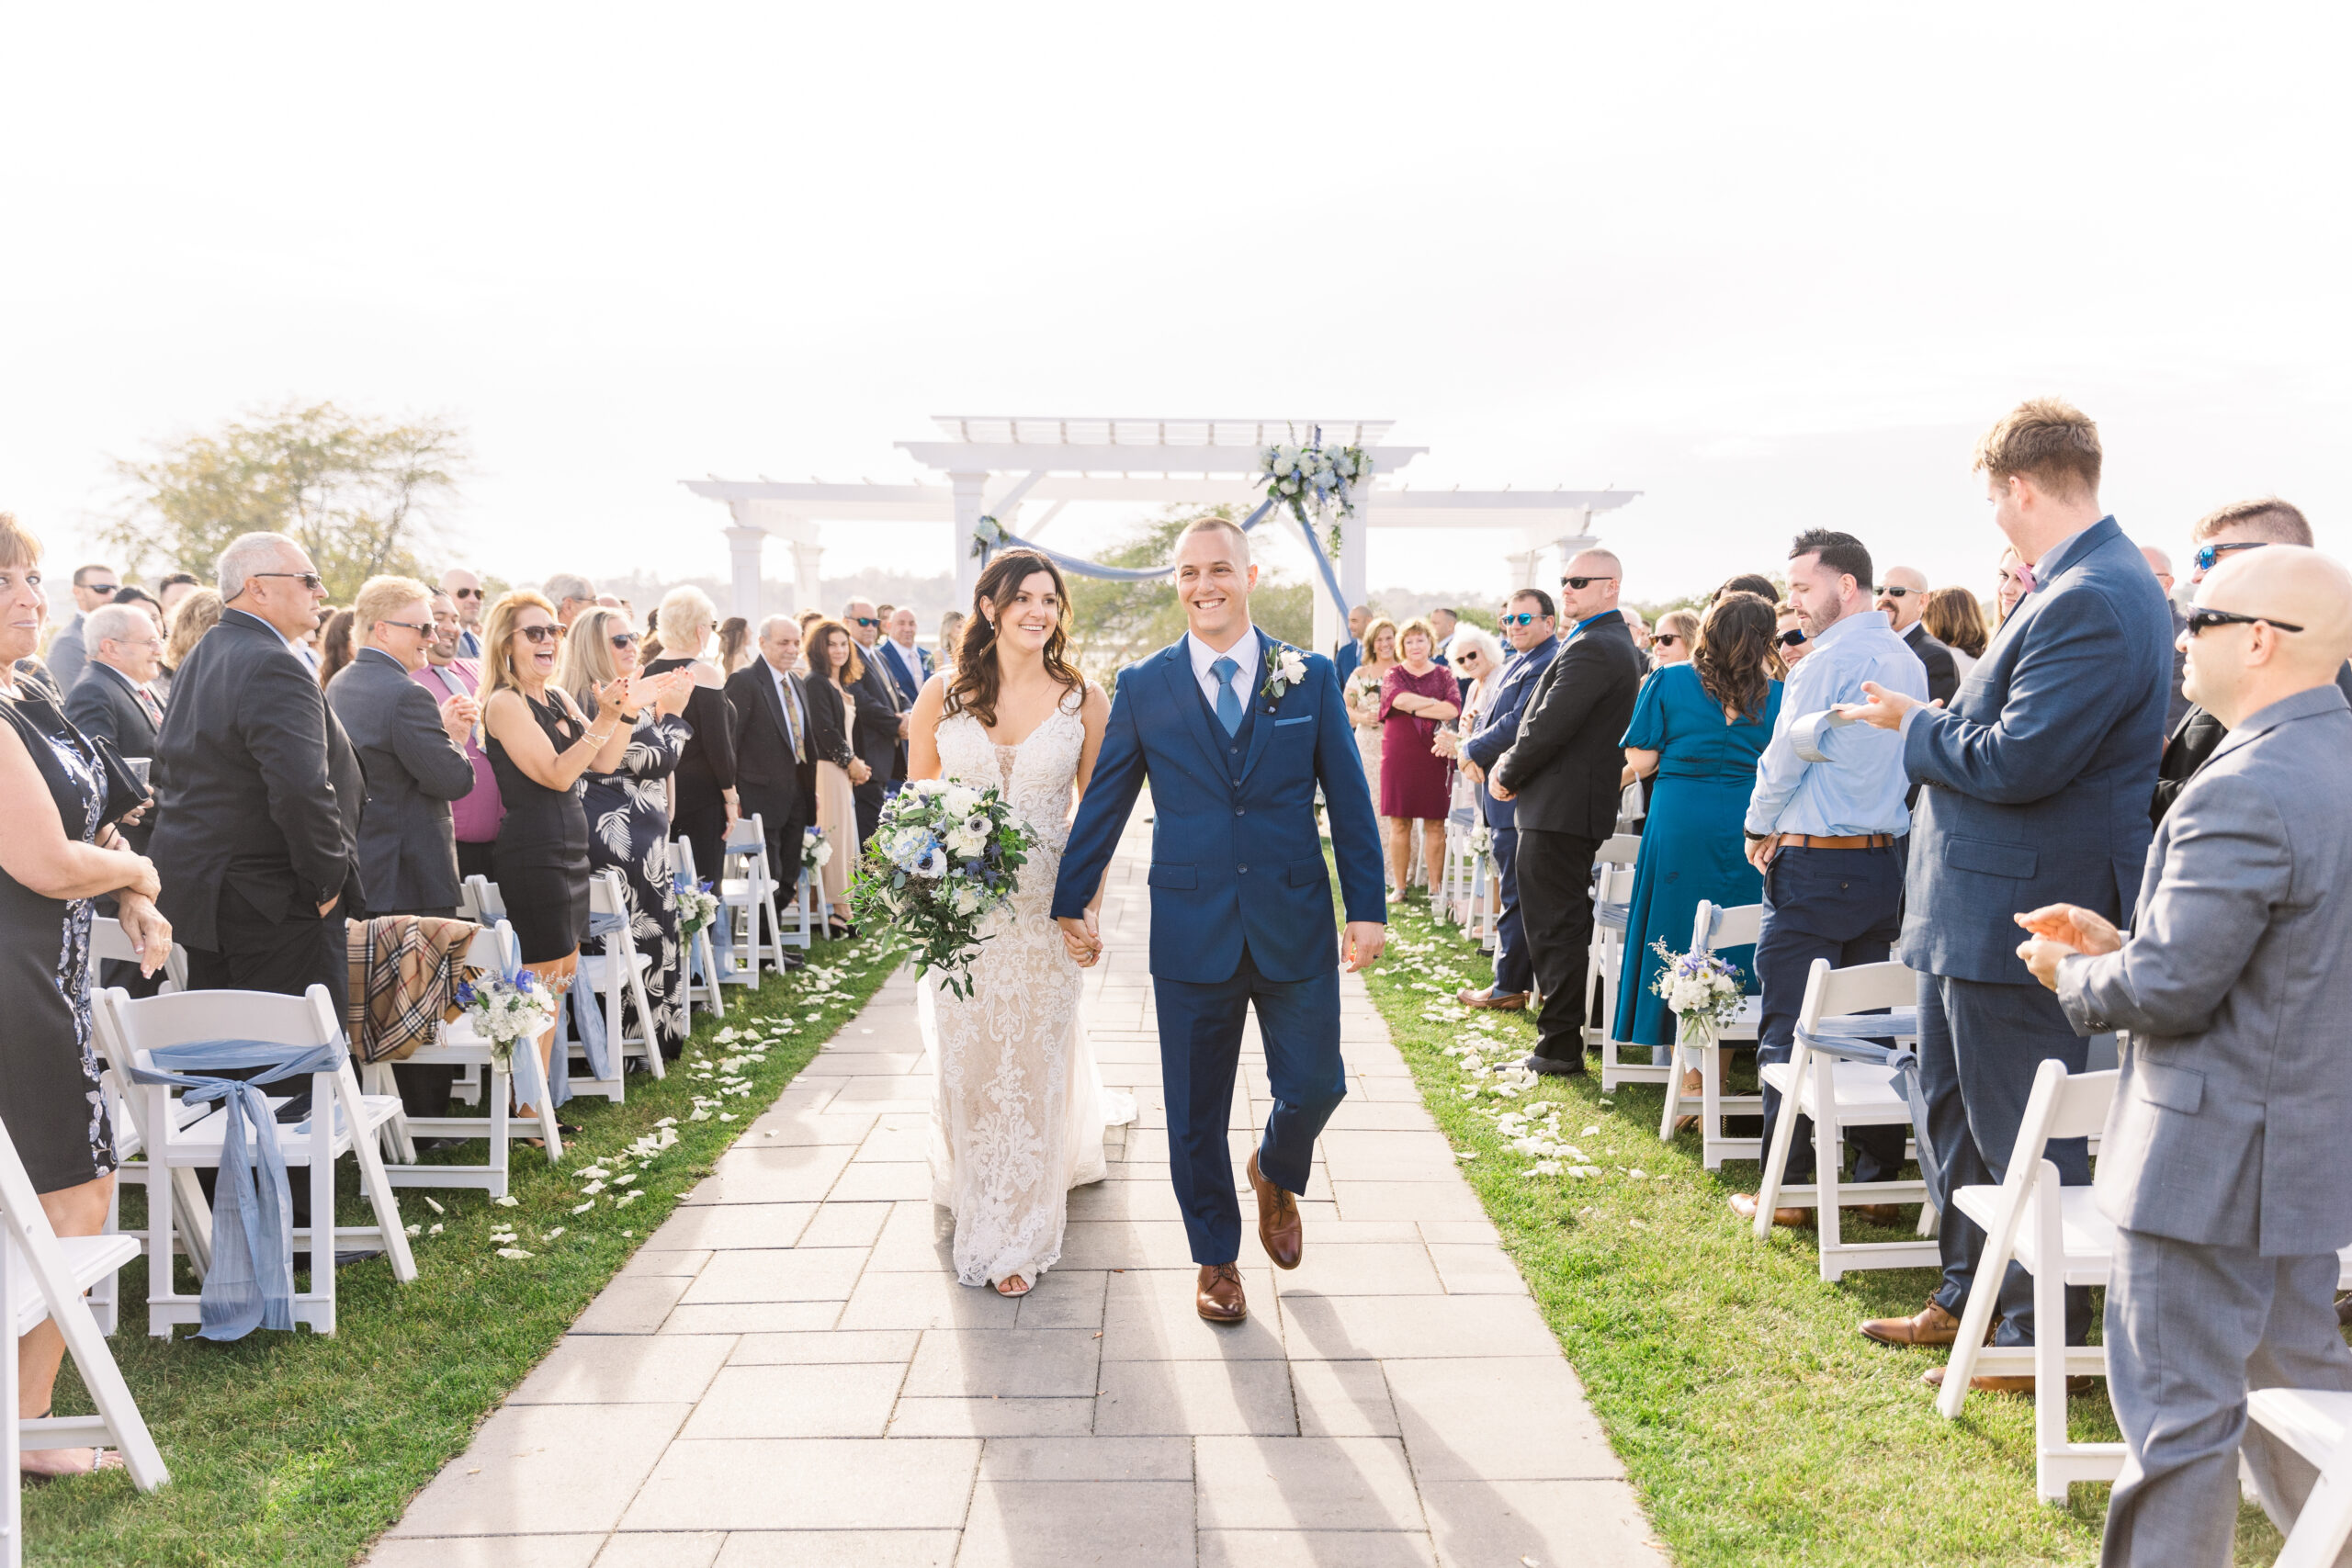 Bride and Groom walk down the aisle together at the Wyndham Newport Hotel after tying the knot on the lawn.